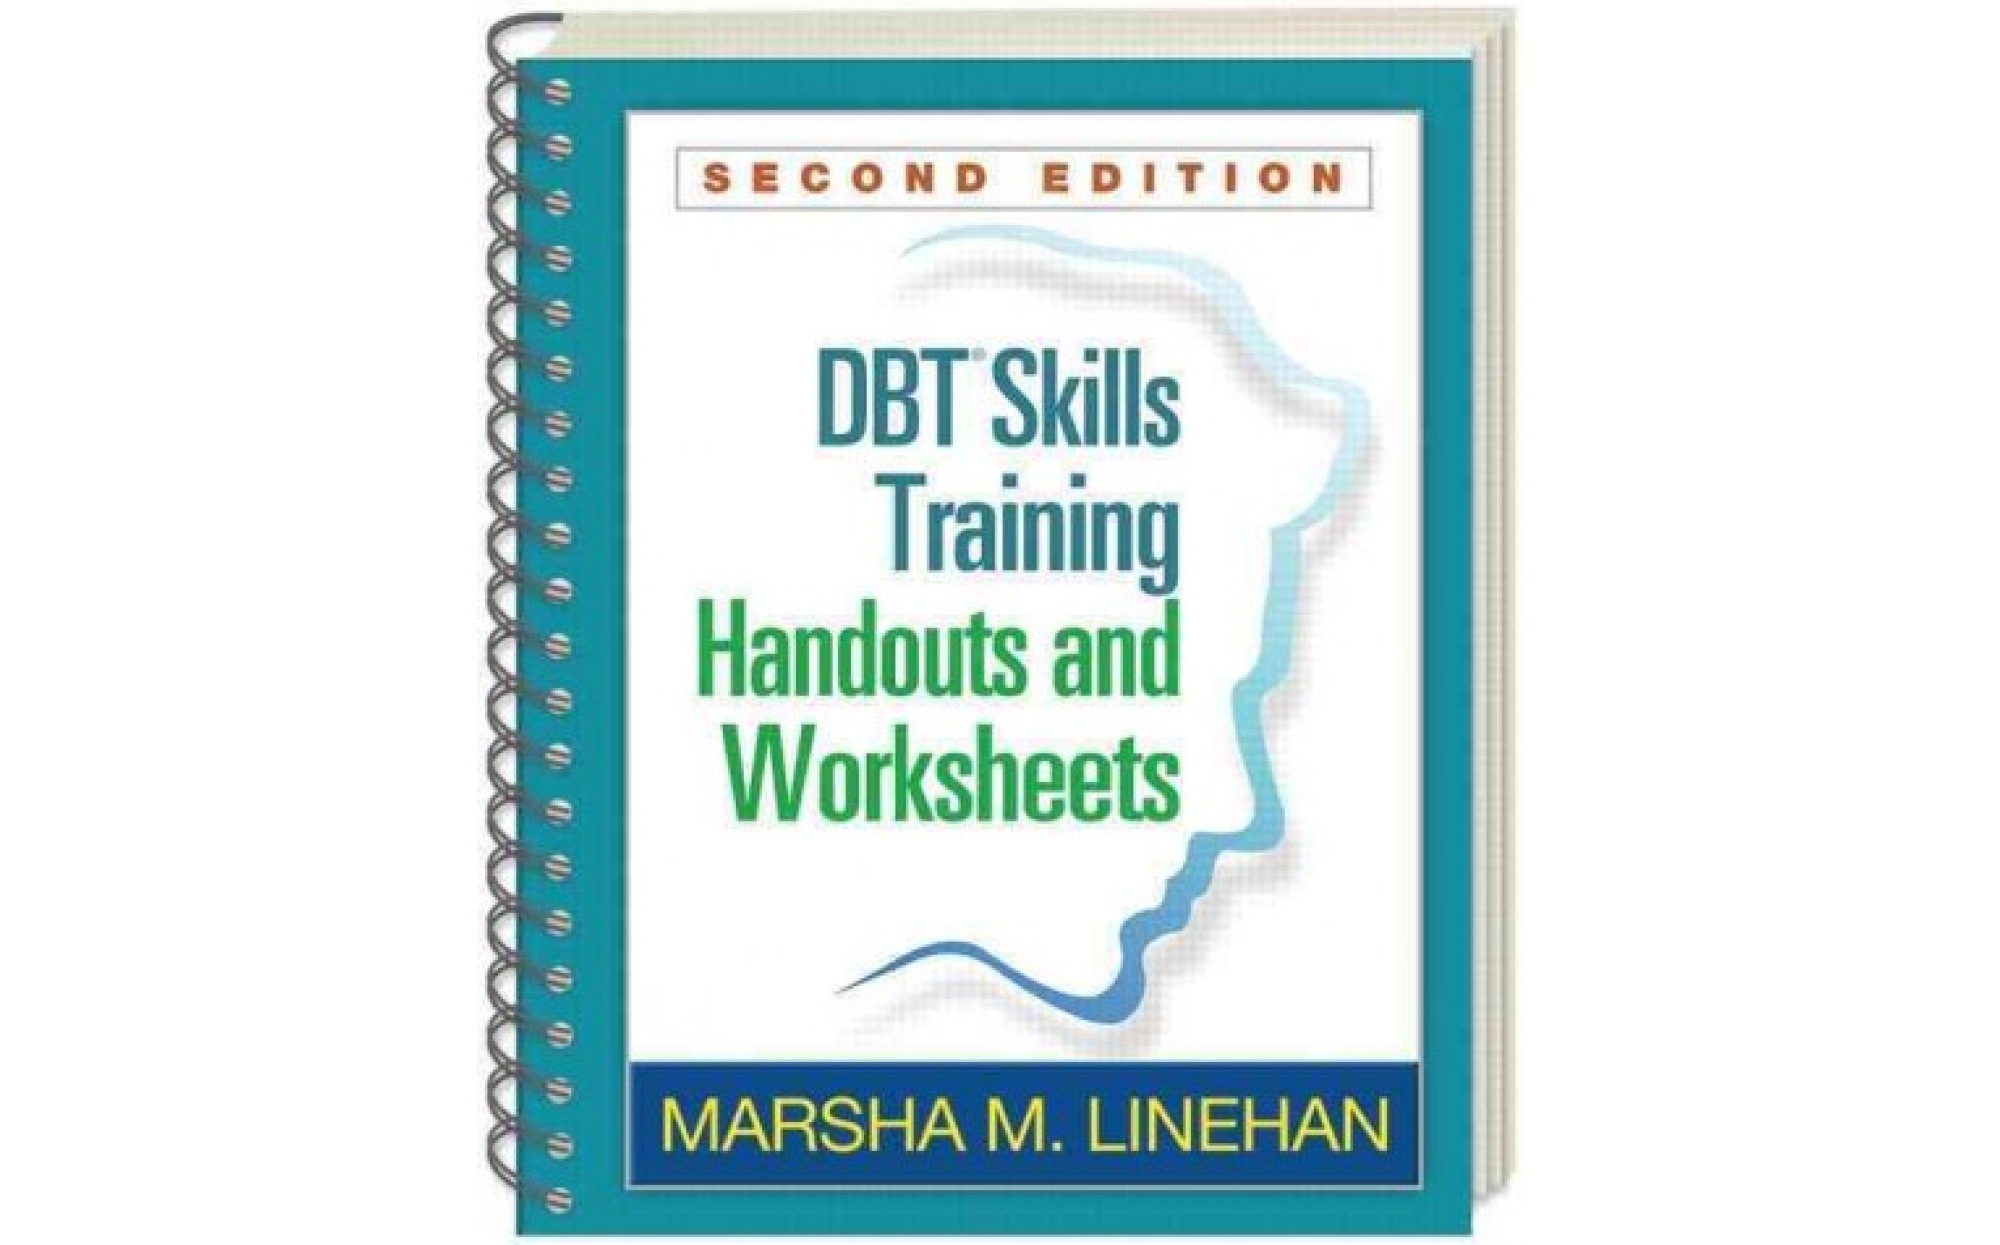 Dbt Skills Training Handouts And Worksheets Second Edition Second Edition